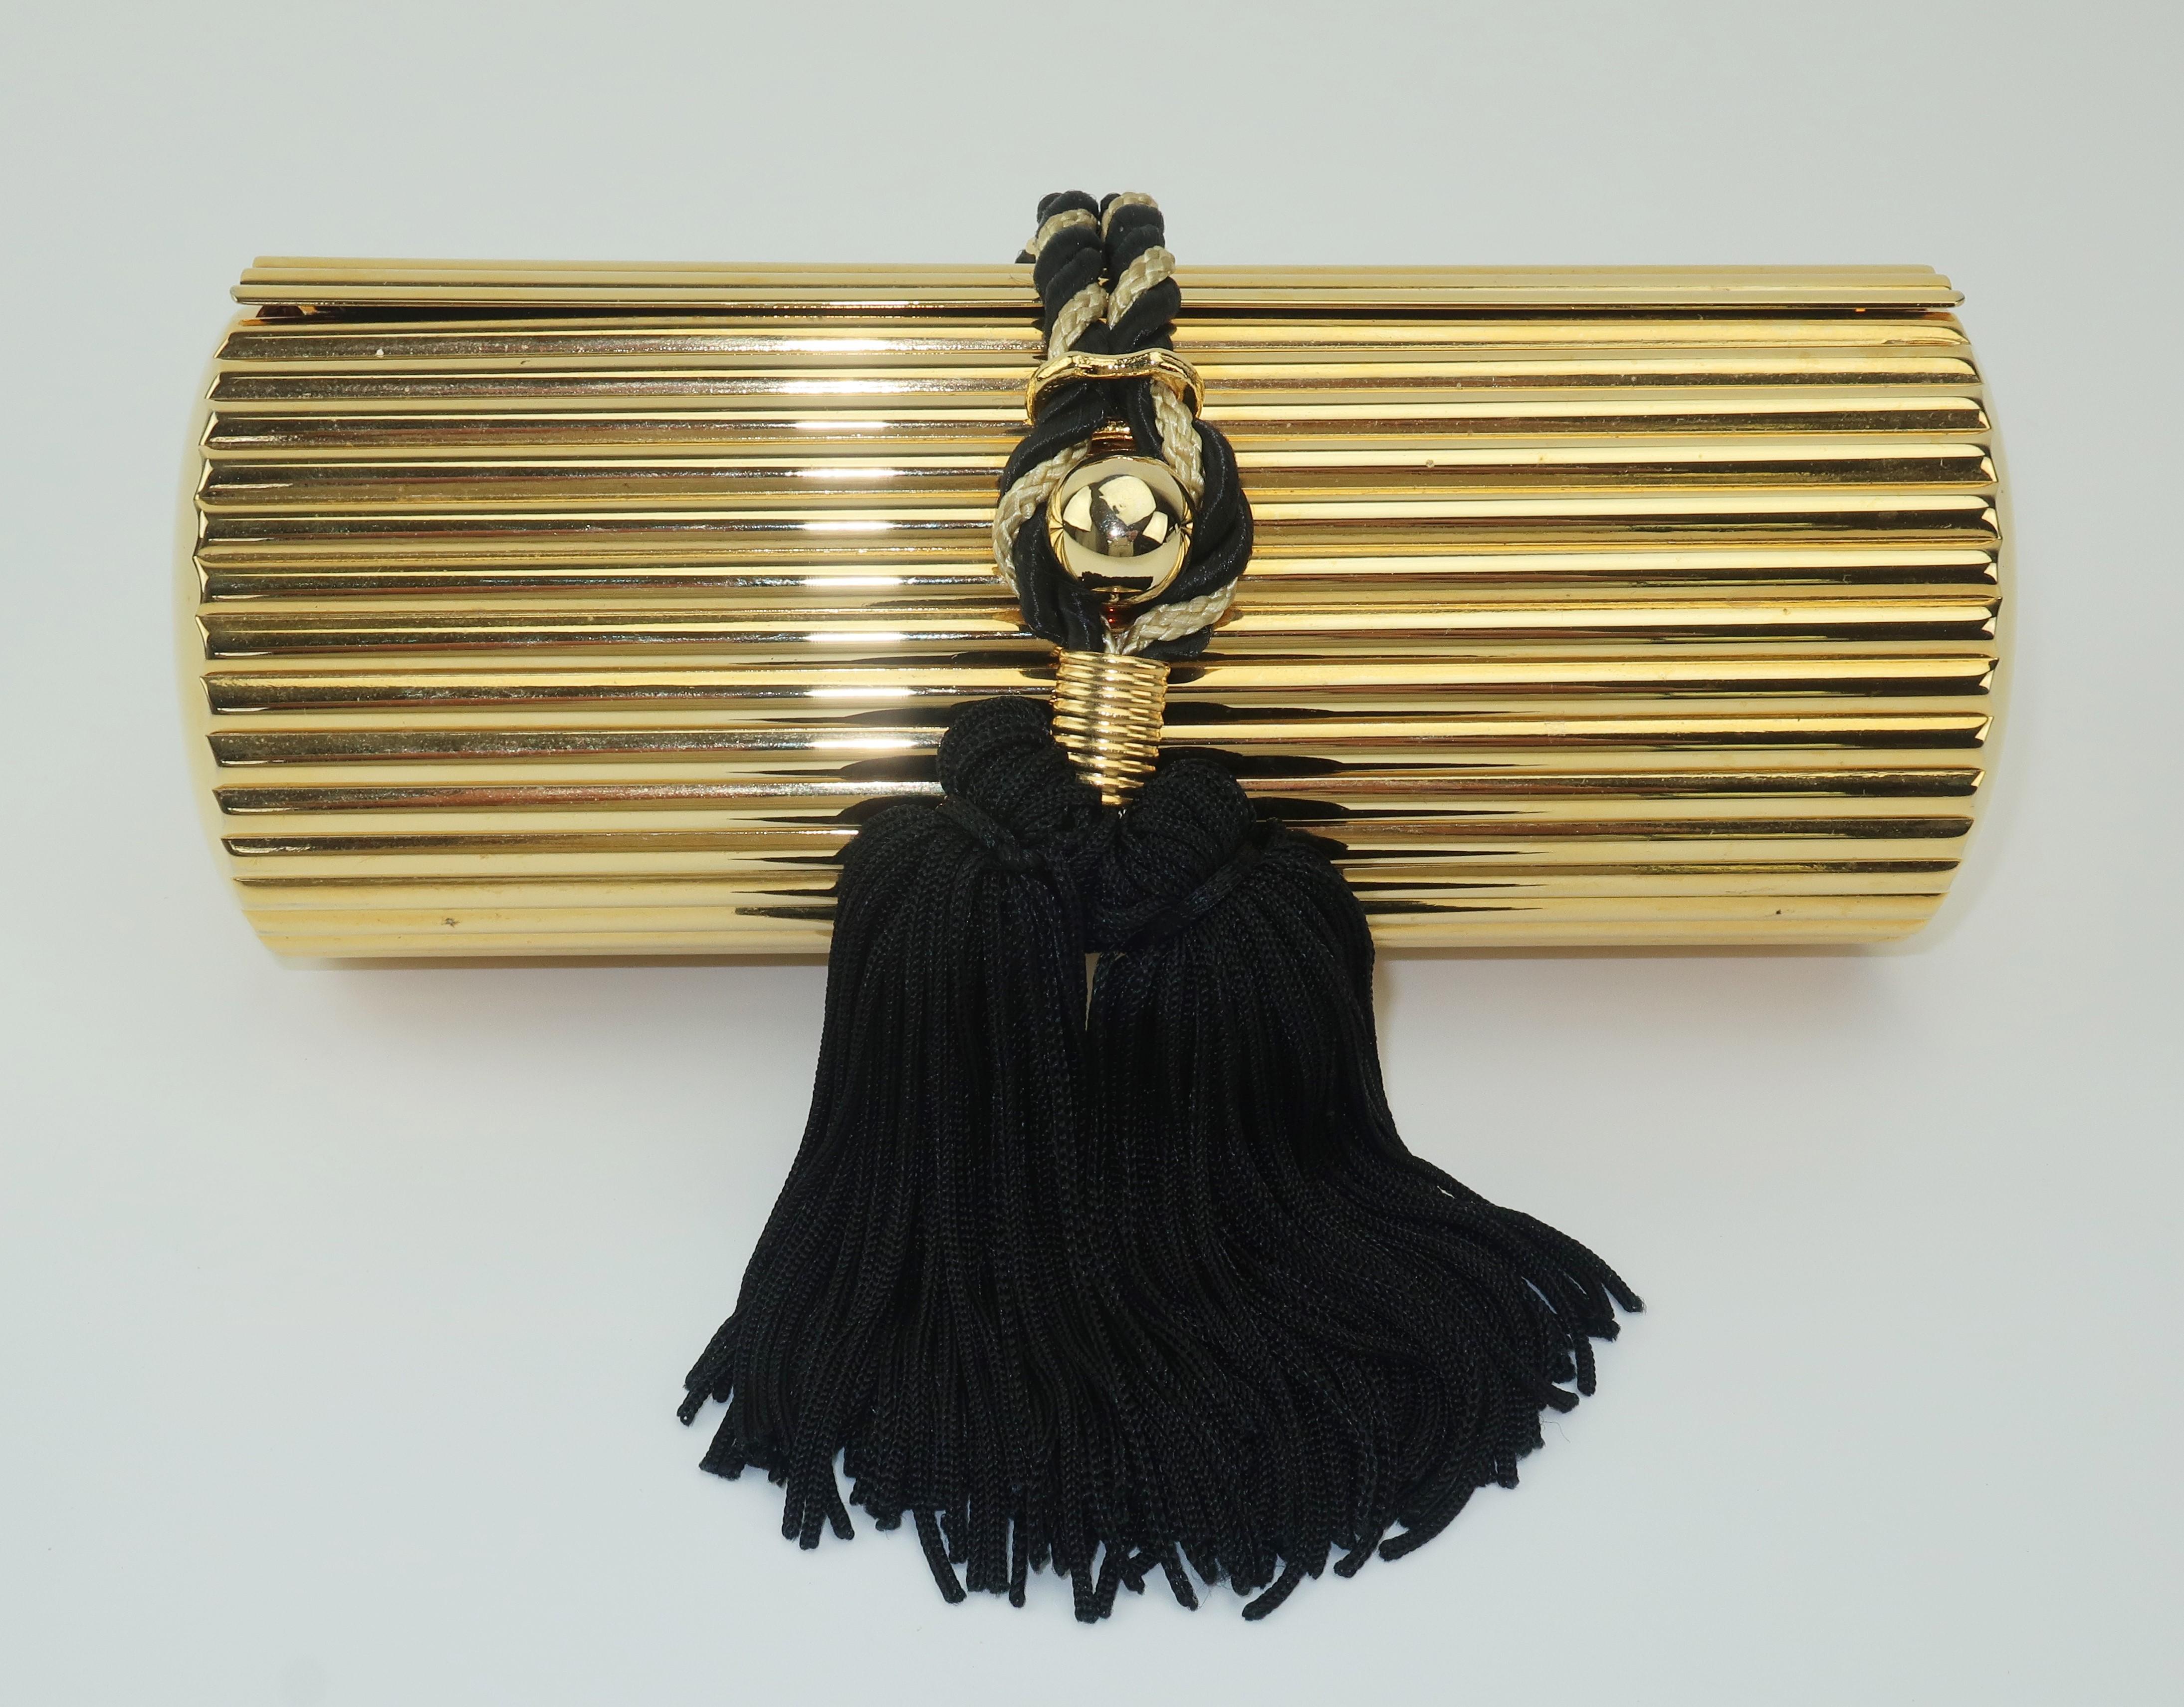 This Walborg handbag is a precious bauble as fun to display as it is to carry.  The gold metal cylinder shape has fluted sides and a nob closure that serves as an anchor for a gold and black braid tassel.  The chain shoulder strap is long enough for